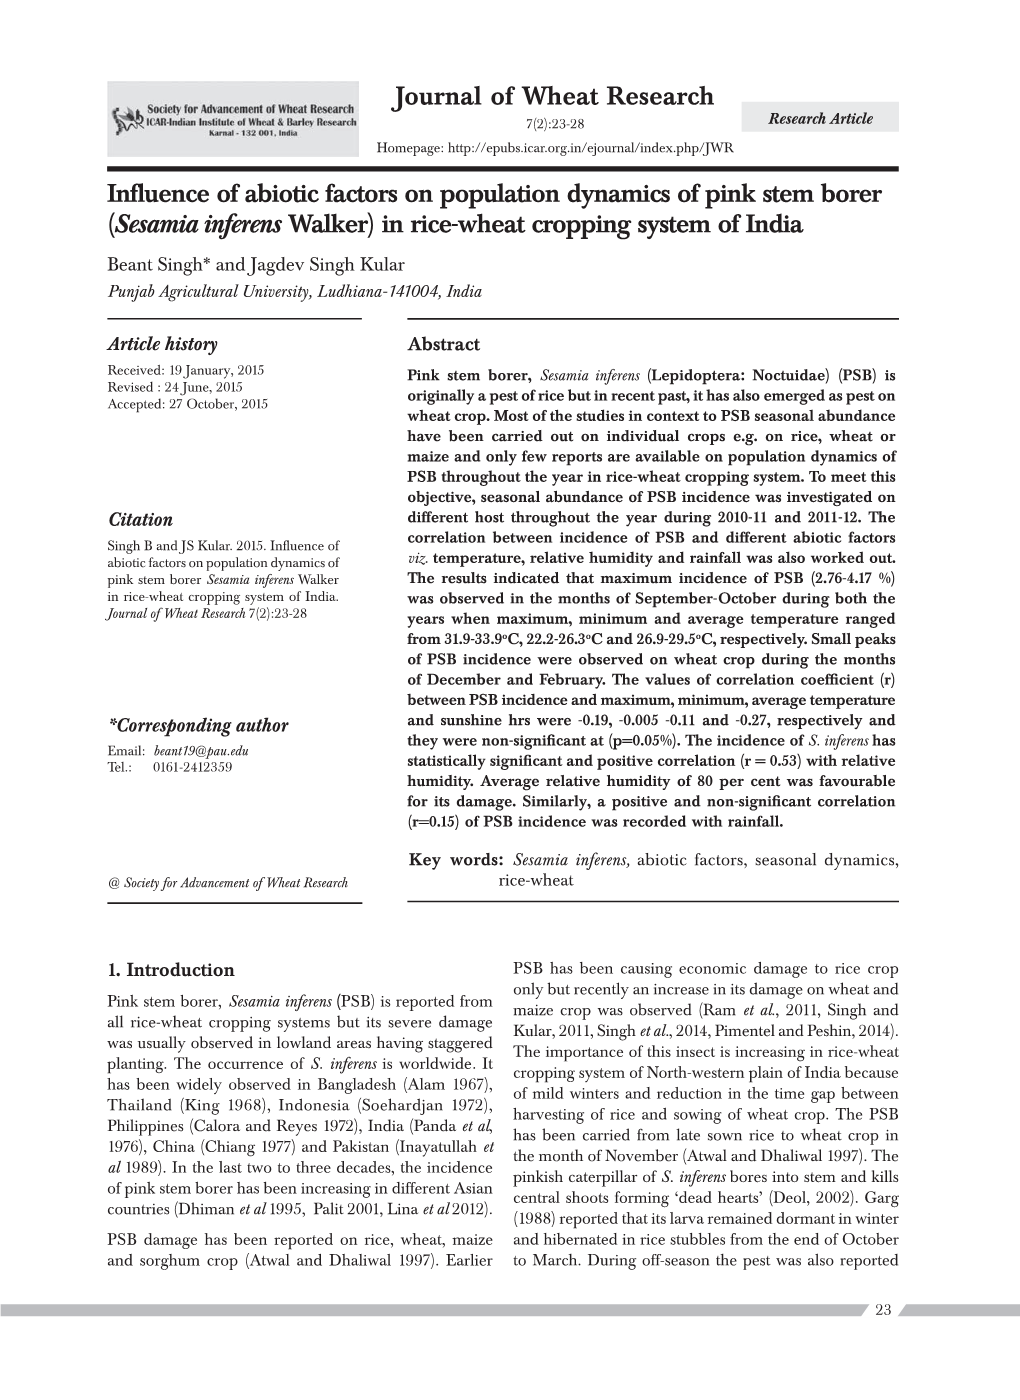 Sesamia Inferens Walker) in Rice-Wheat Cropping System of India Beant Singh* and Jagdev Singh Kular Punjab Agricultural University, Ludhiana-141004, India